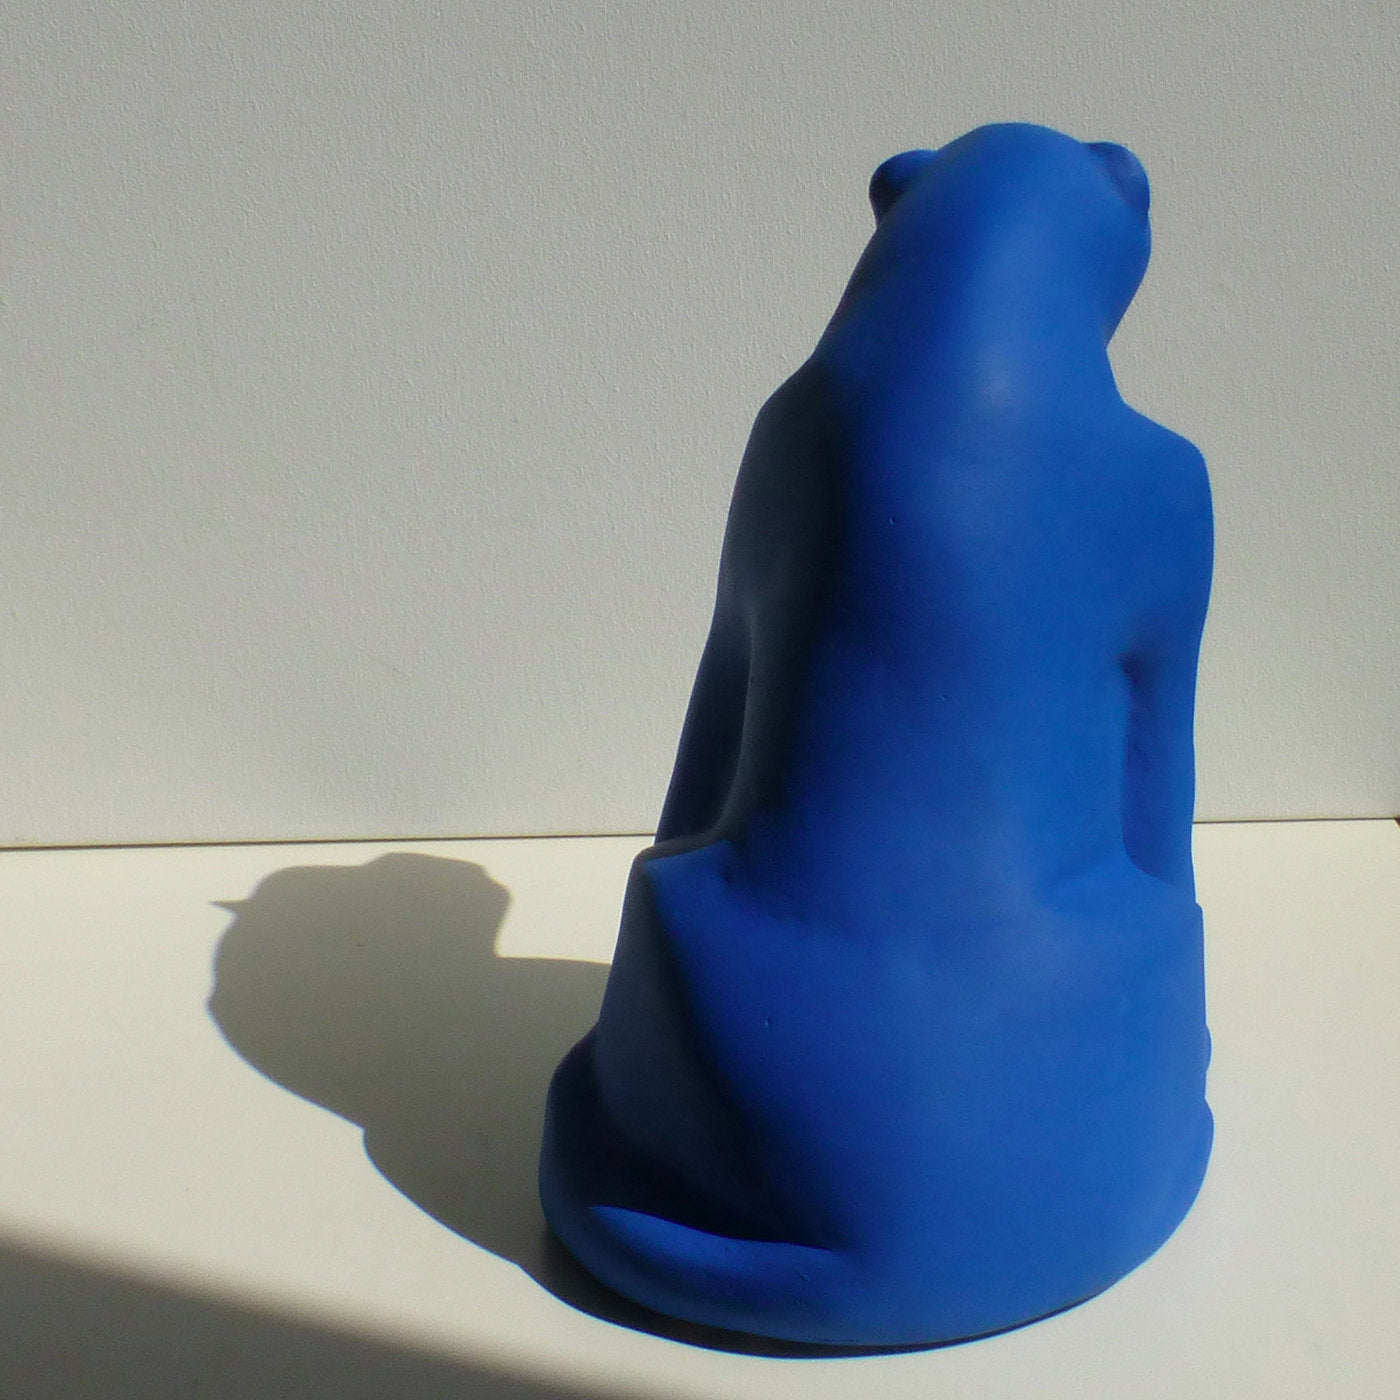 Electric Blue Panther Sculpture - Alternative view 1